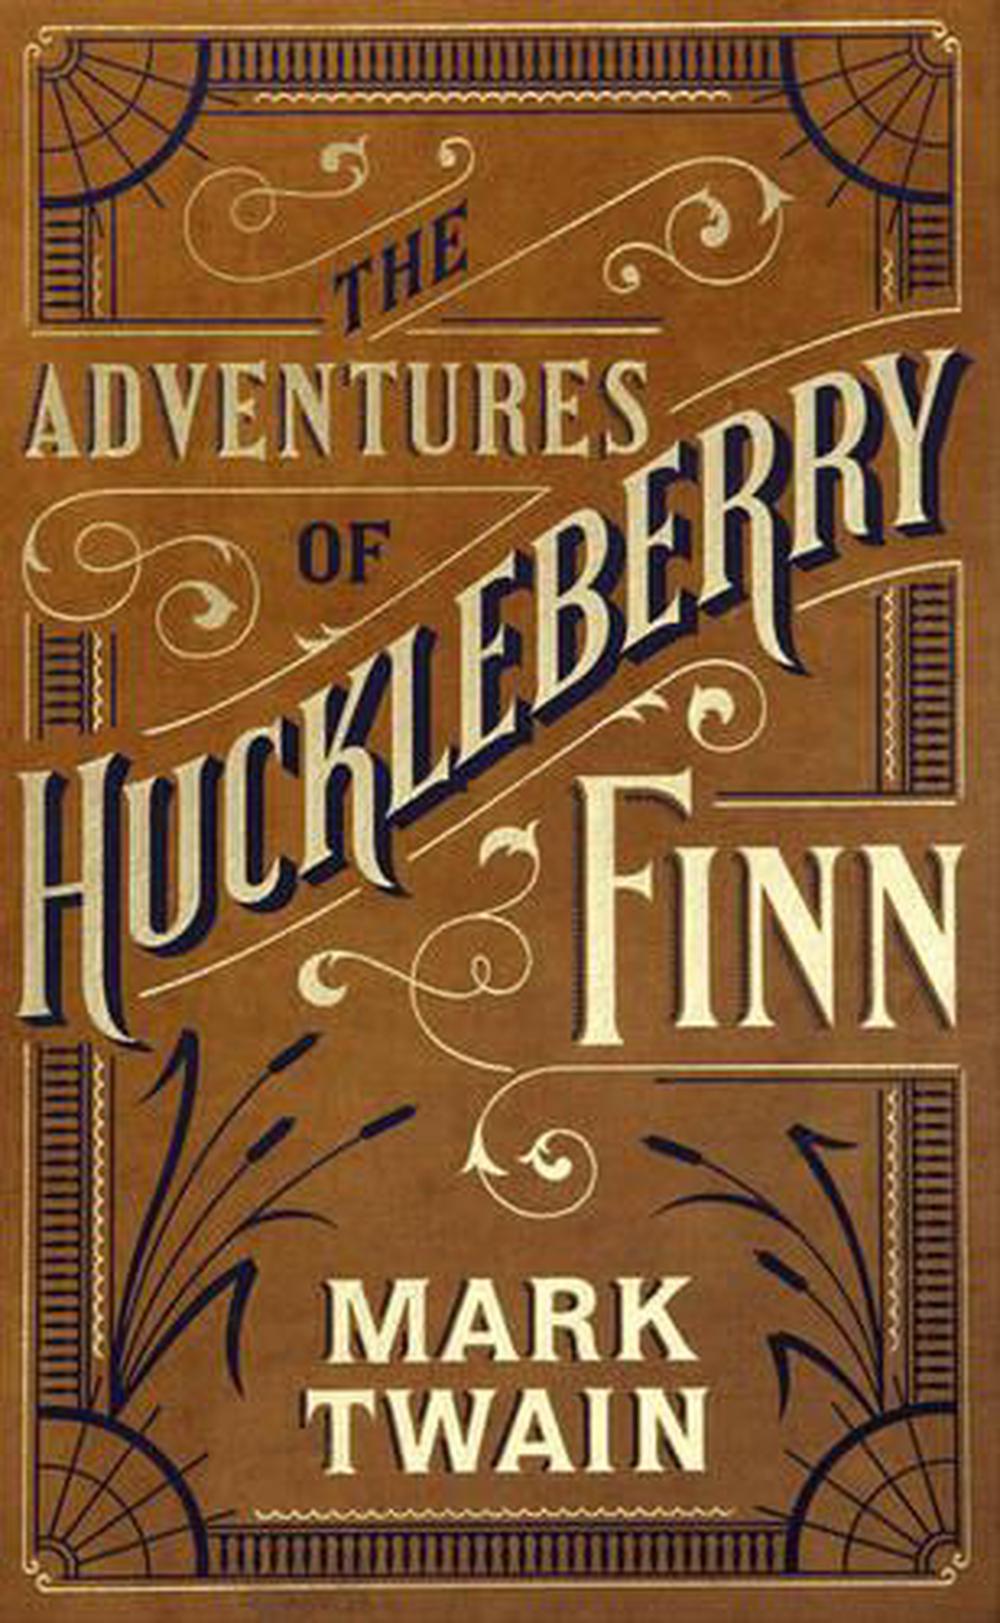 The Adventures of Huckleberry Finn for apple download